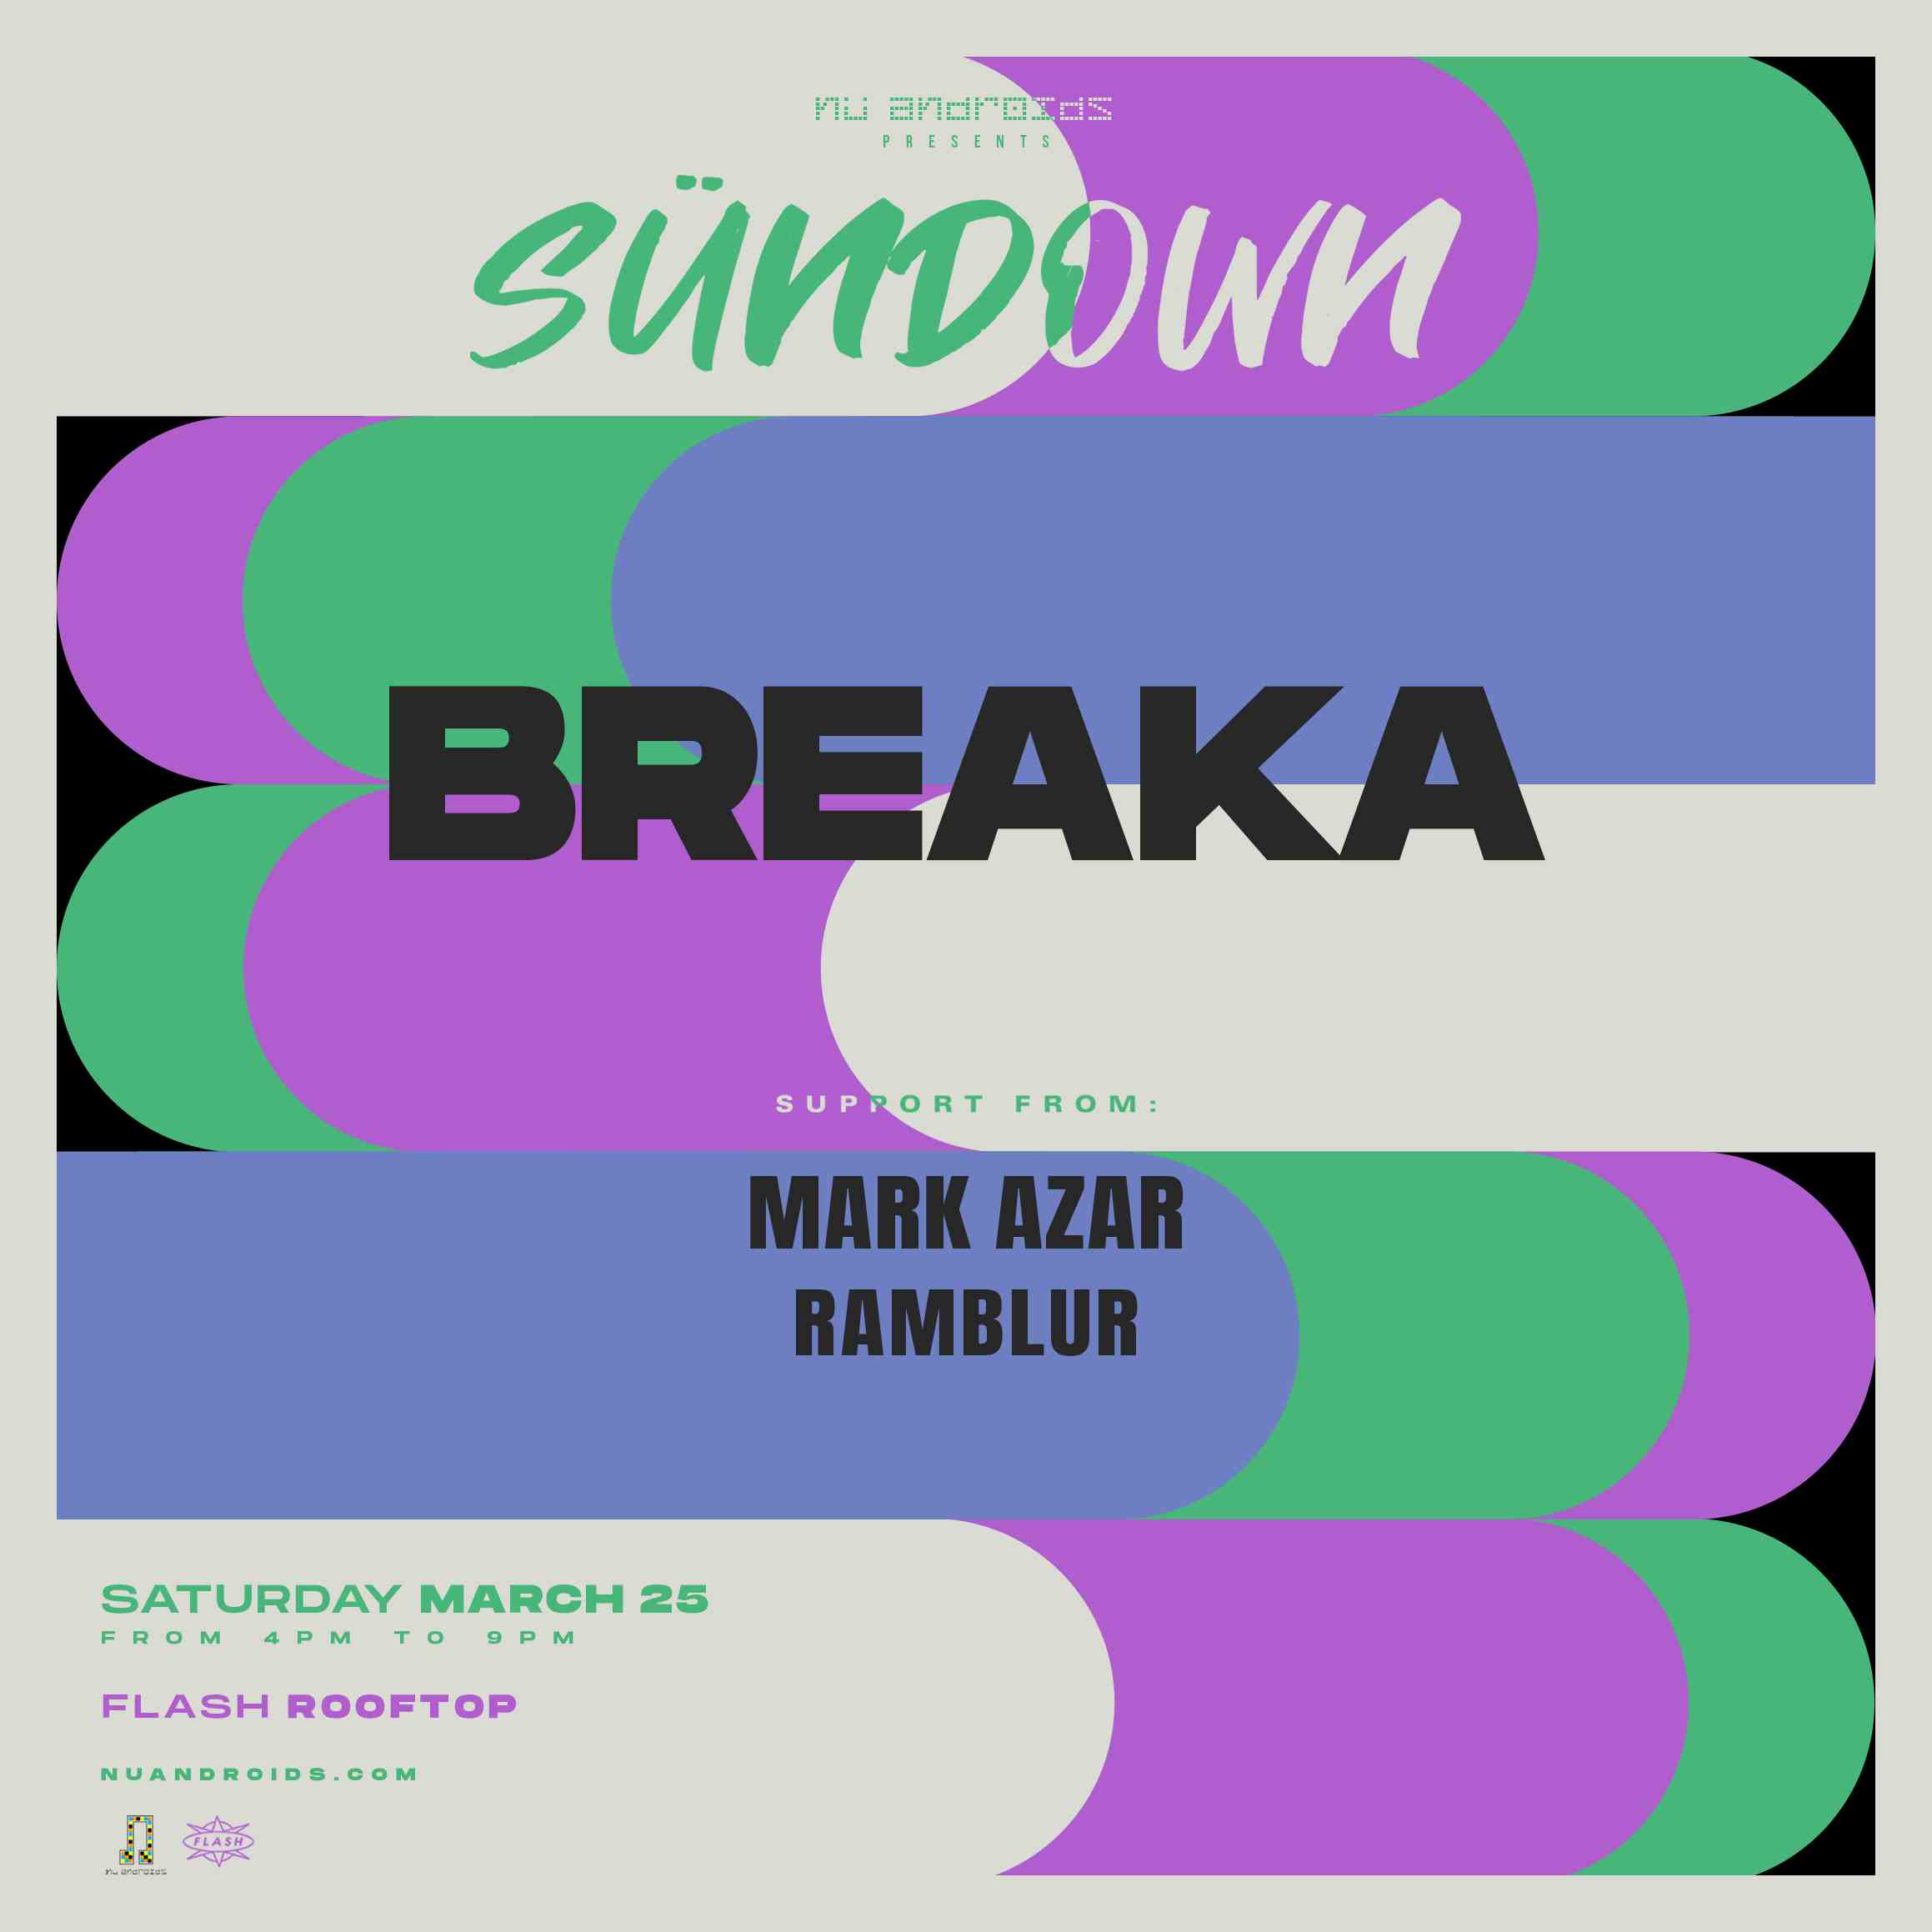 Event image for Nü Androids Presents SünDown: Breaka (21+)